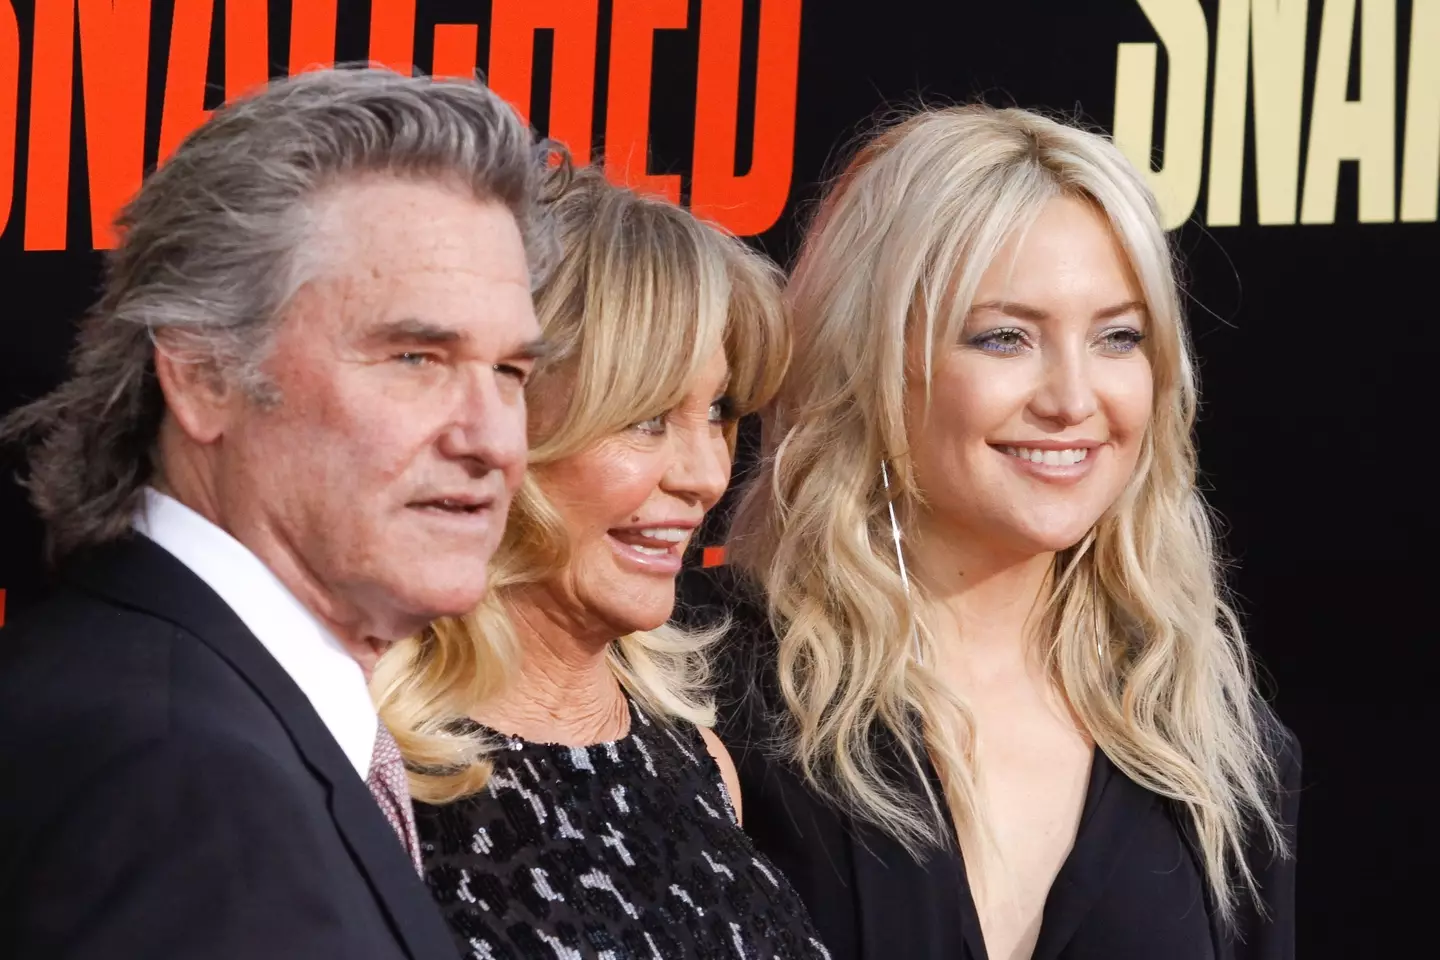 Hudson with Goldie Hawn and Kurt Russell.